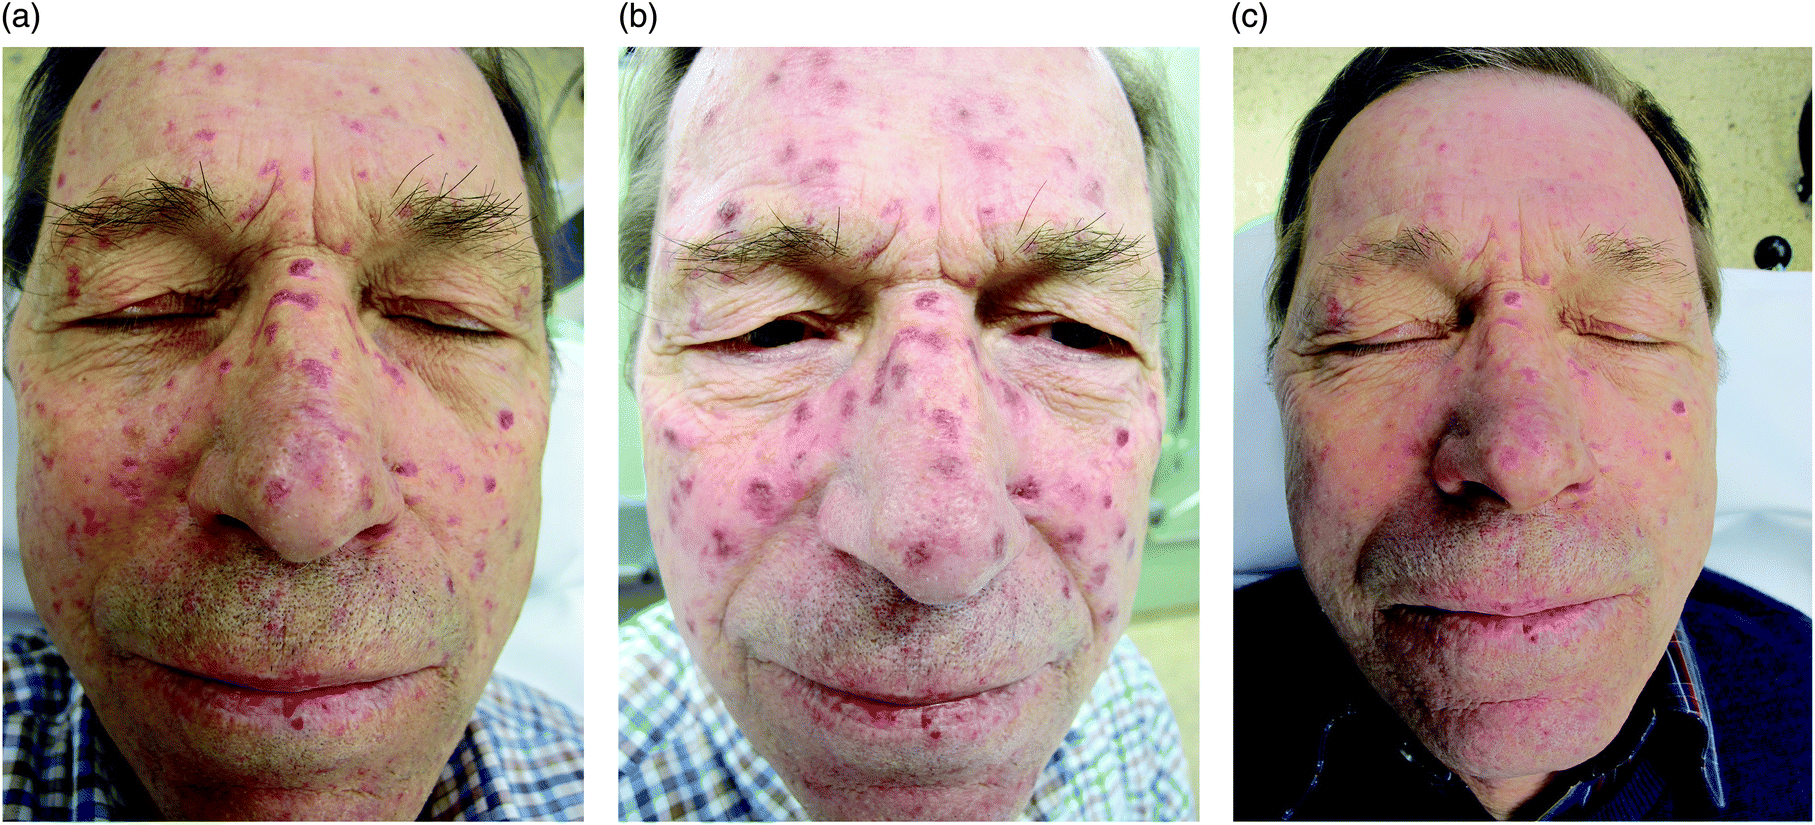 Laser treatment of vascular dermatological diseases using a pulsed dye  laser (595 nm) in combination with a Neodym:YAG-laser (1064 nm) -  Photochemical & Photobiological Sciences (RSC Publishing)  DOI:10.1039/C9PP00079H